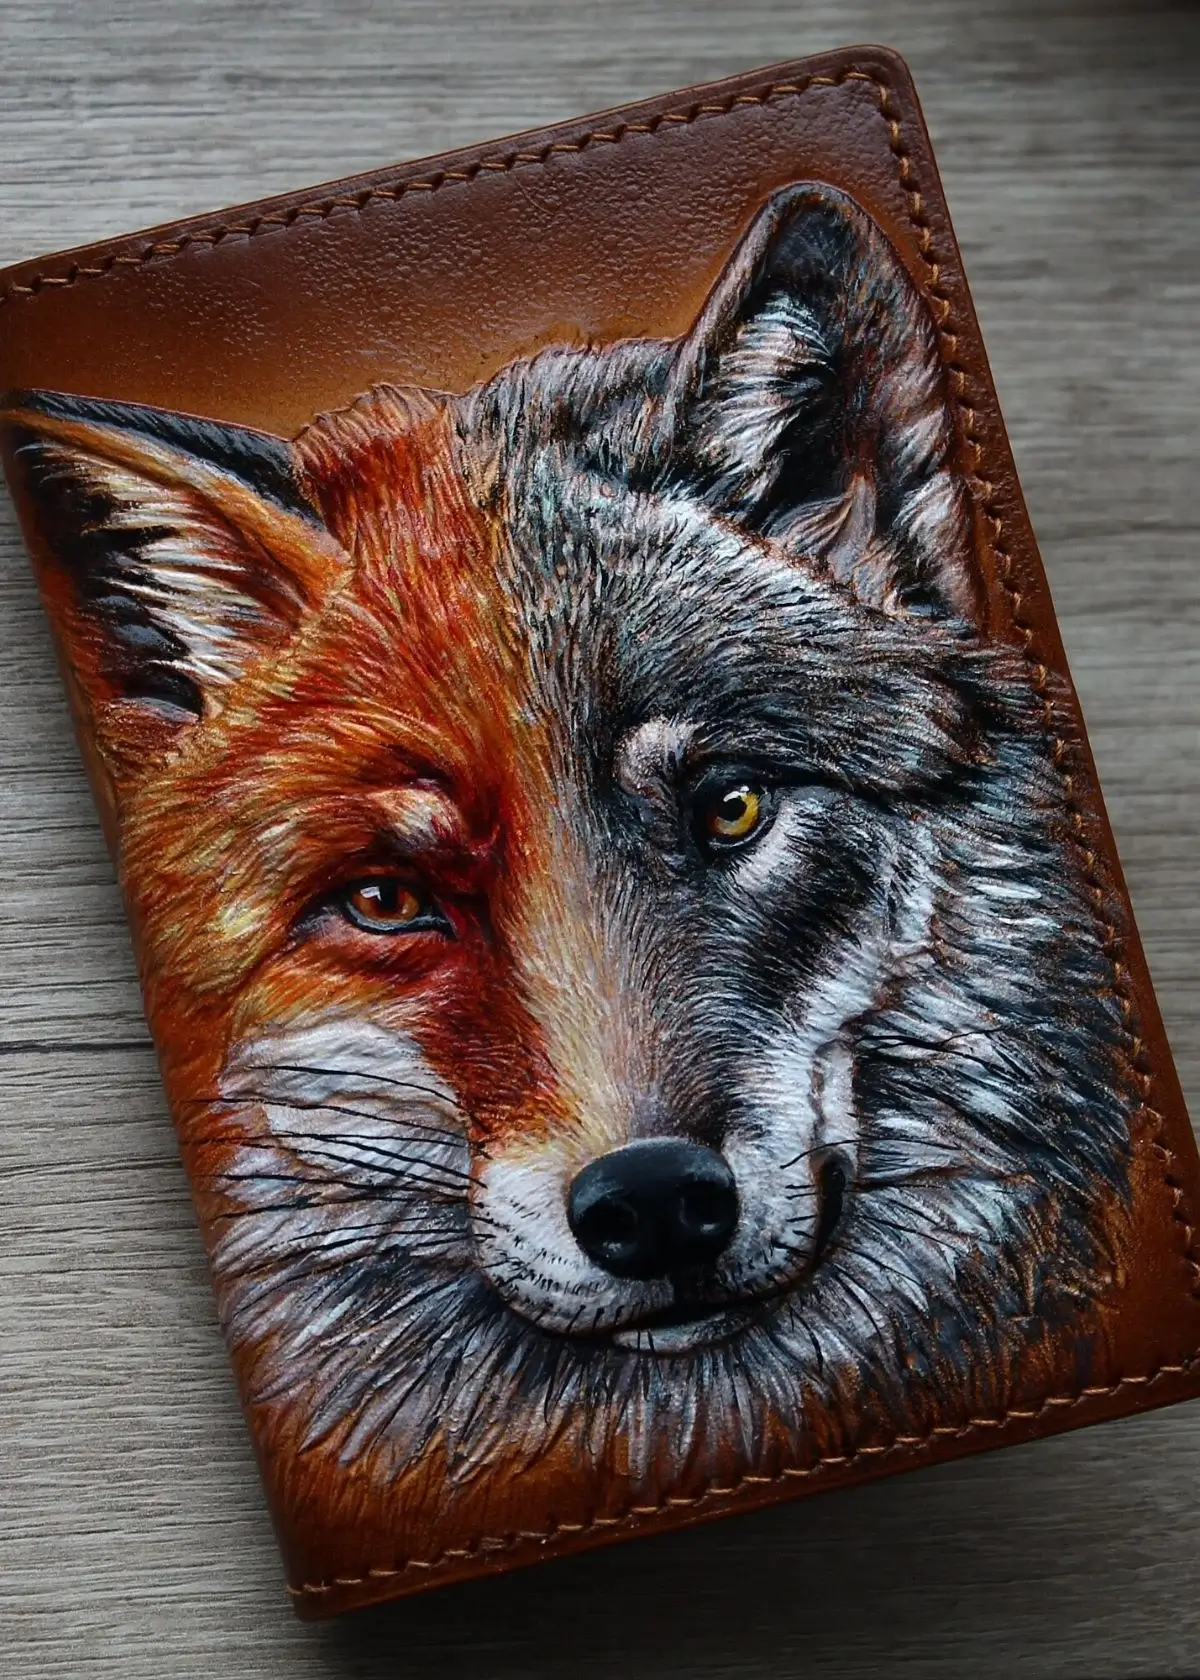 How to choose the right fox wallets?